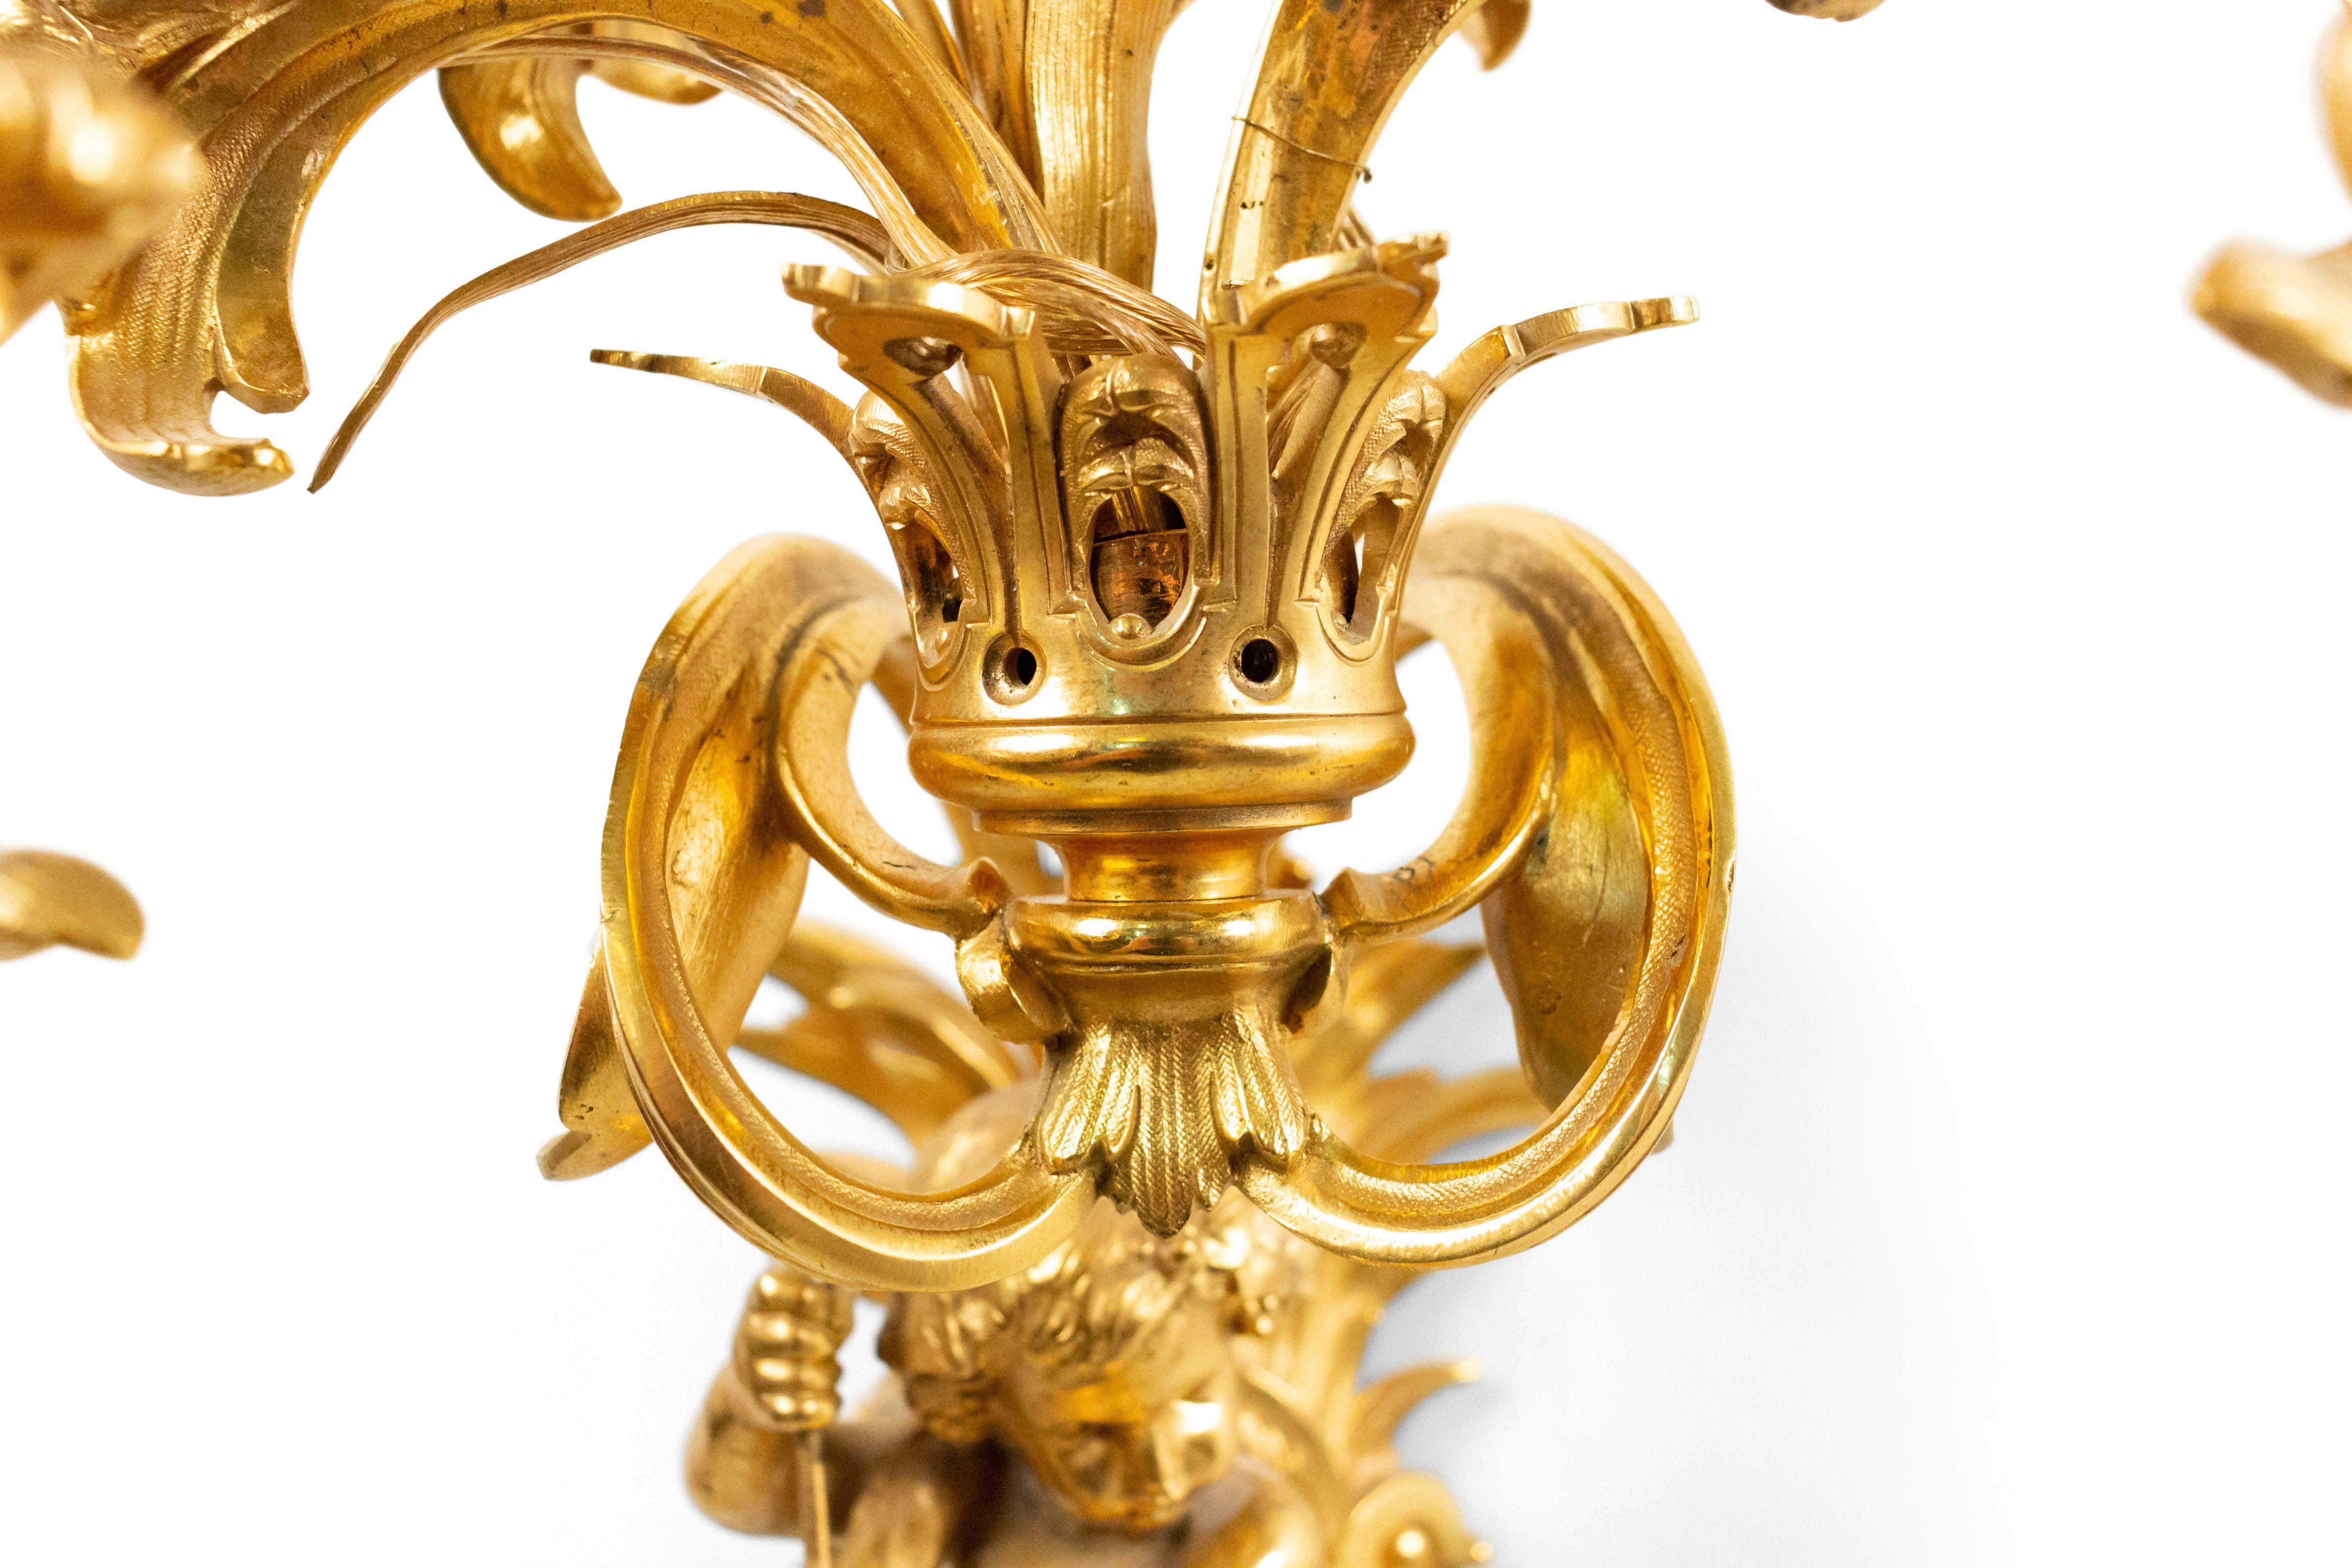 Pair of French Louis XV style bronze doré wall sconce with five arms and cupid holding musical instruments with floral trim (19th century).
 